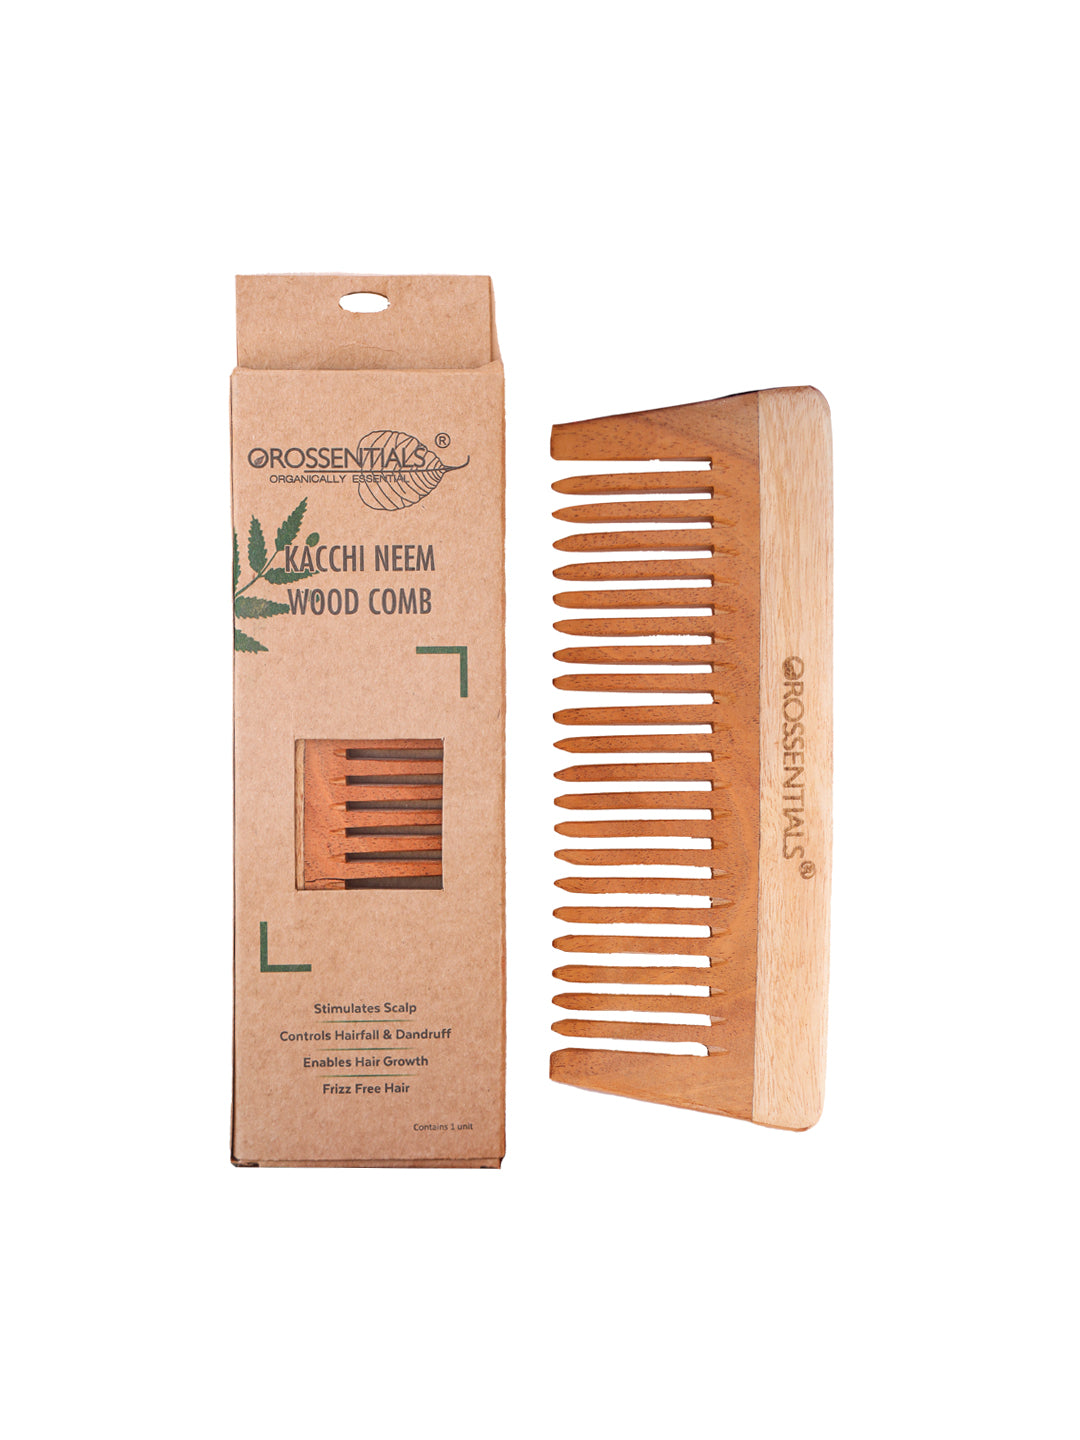 Wooden Comb set of 2- Entangle, Two in one